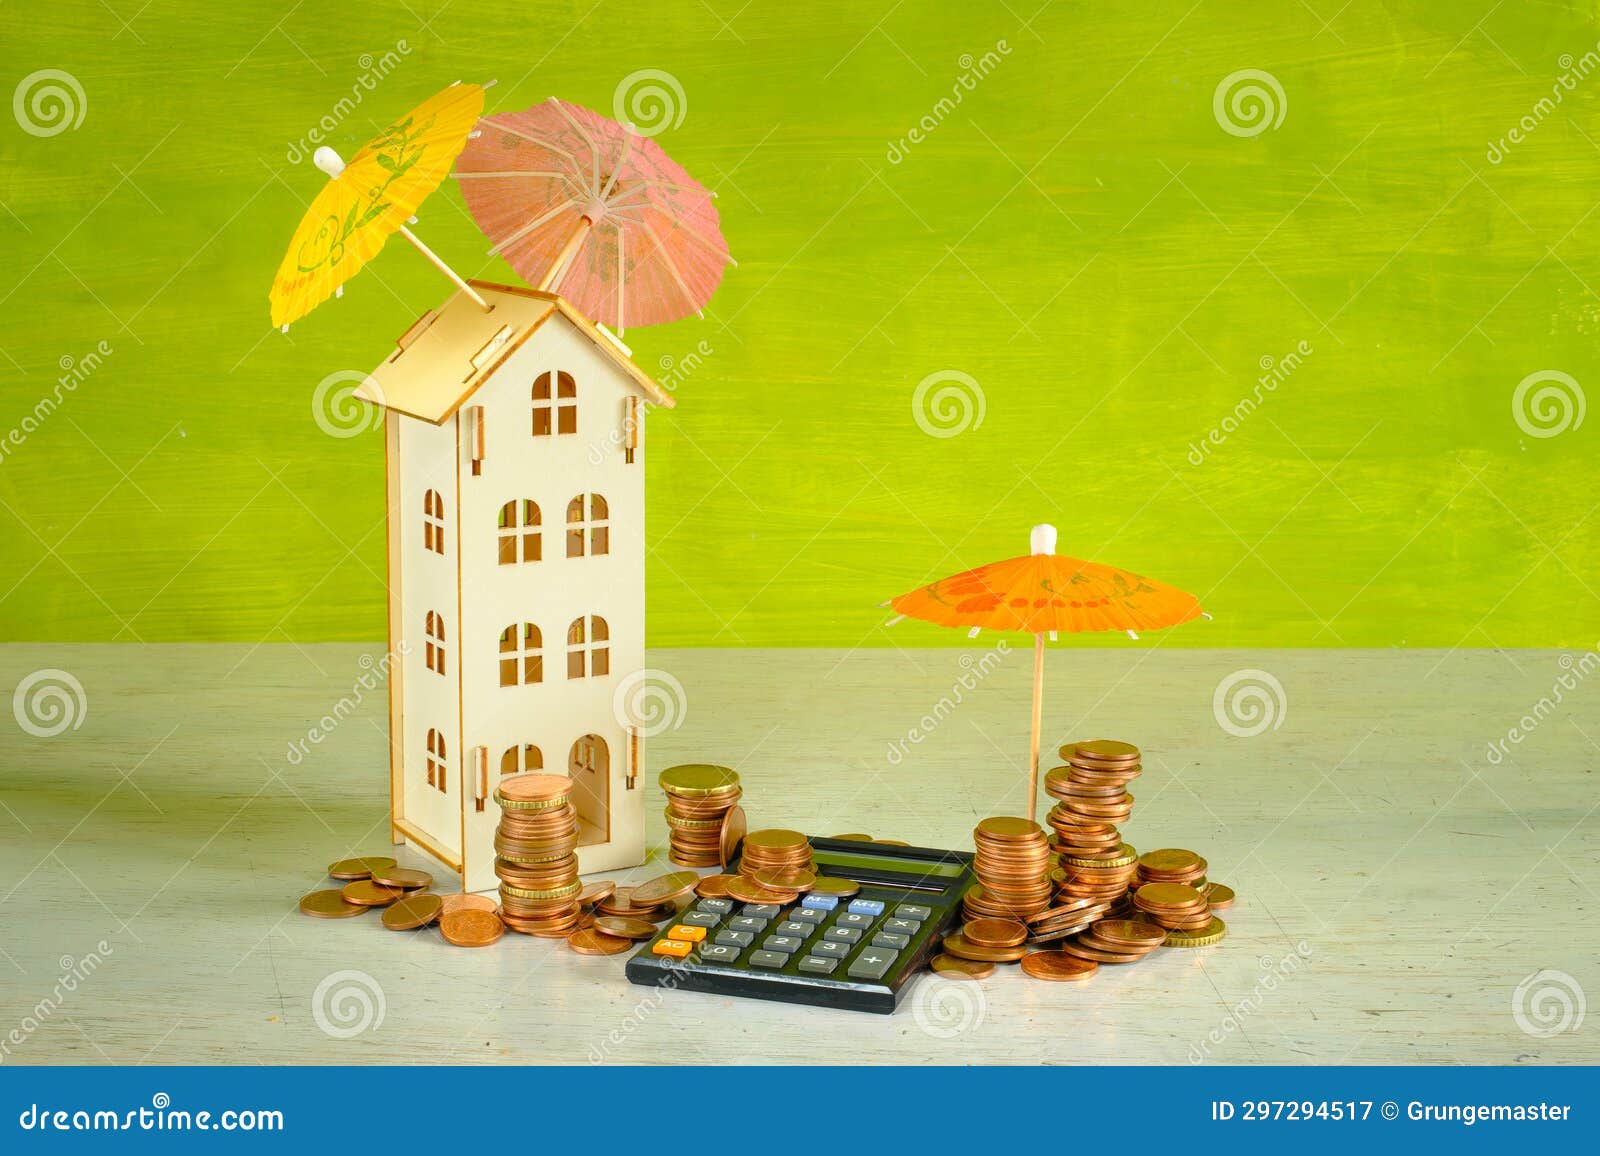 wealth management, assest mangement concept with pocket calculator,stacks of money, a wooden house and multicolored umbrellas,